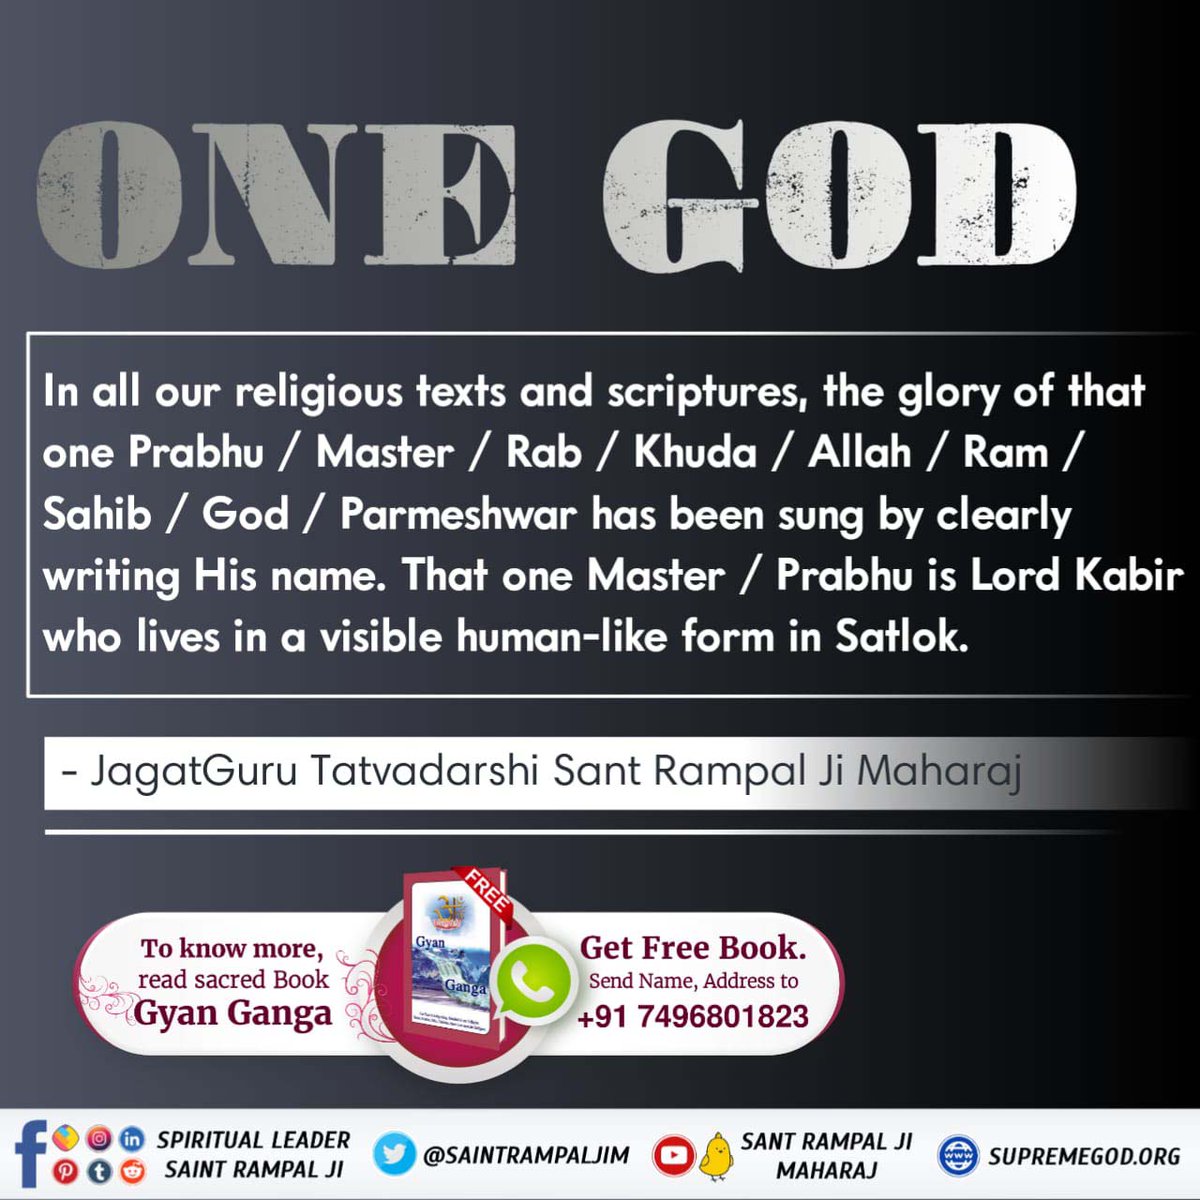 #आओ_जानें_सनातन_को
Sanatan Dharma is great, All the current spiritual leaders are advocating practices that do not benefit humanity.

Sant Rampal Ji Maharaj